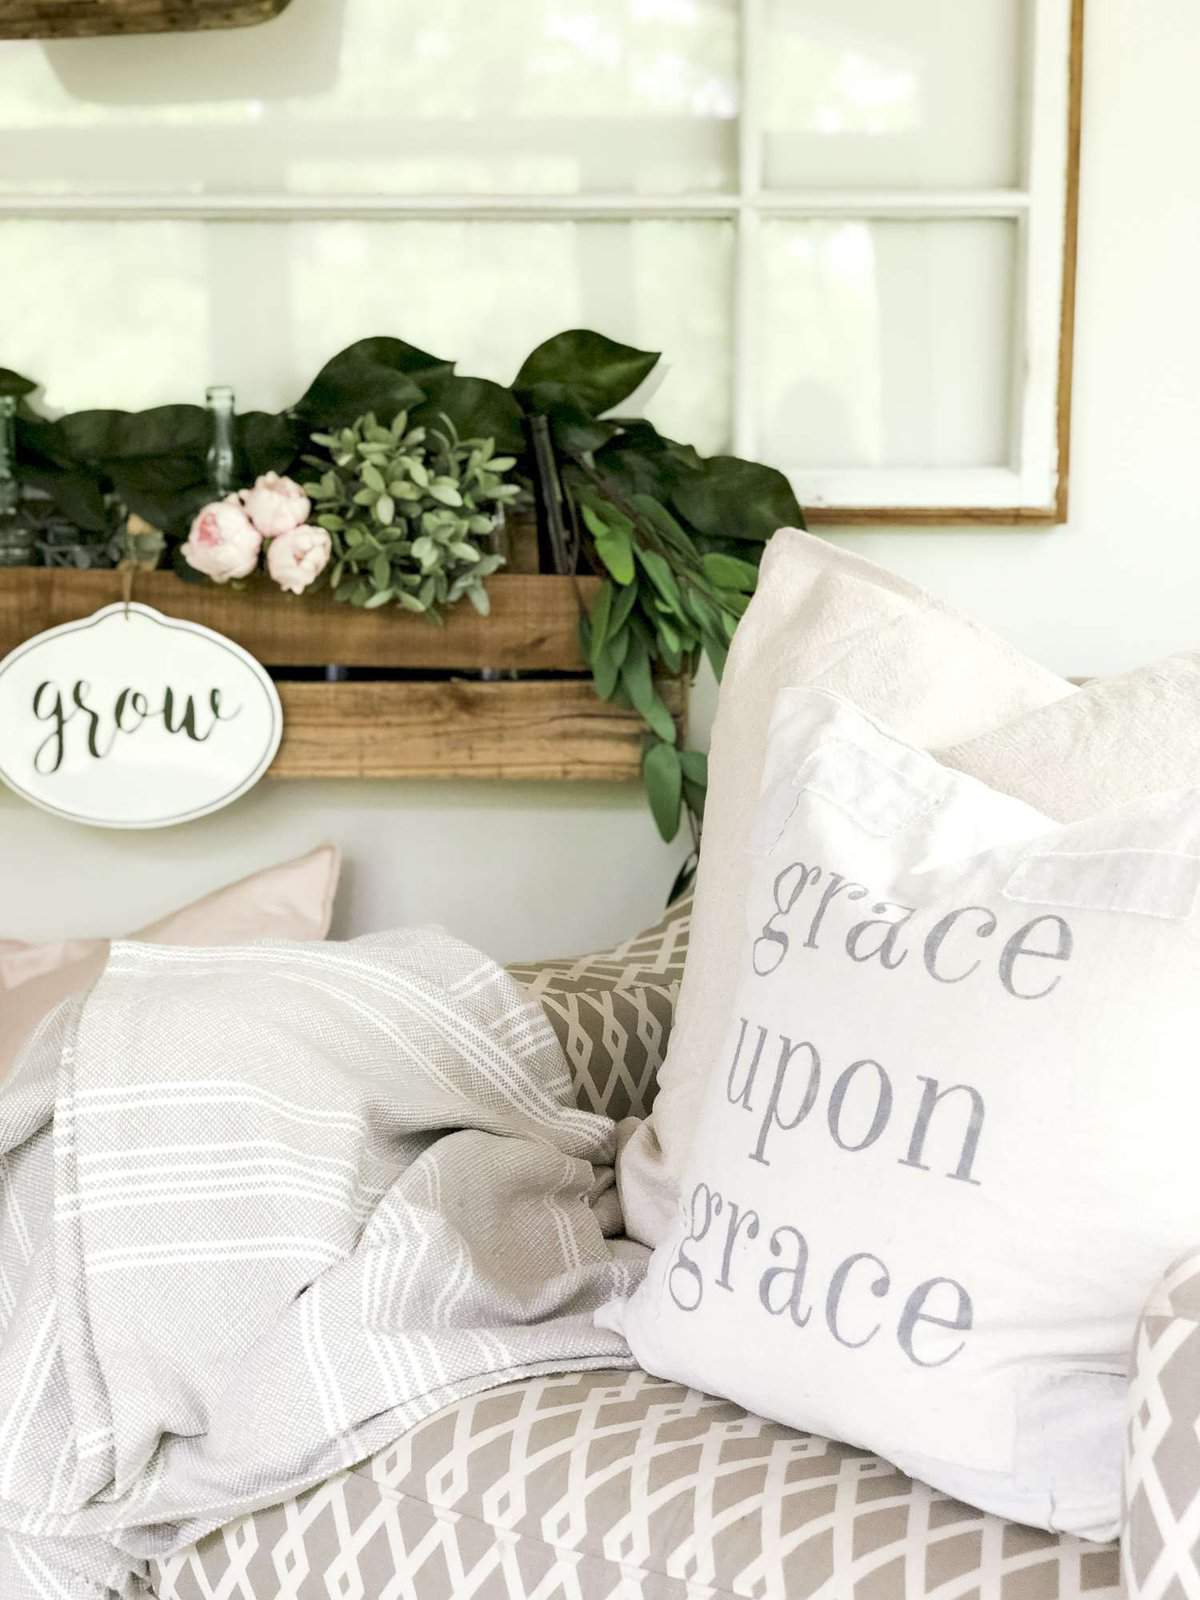 Are you looking for new ways to use vintage home decor in a modern home? I'll show you how to add touches of vintage for summer decor in my office/sunroom. #fromhousetohaven #vintagedecor #vintagehomedecor #officestyling